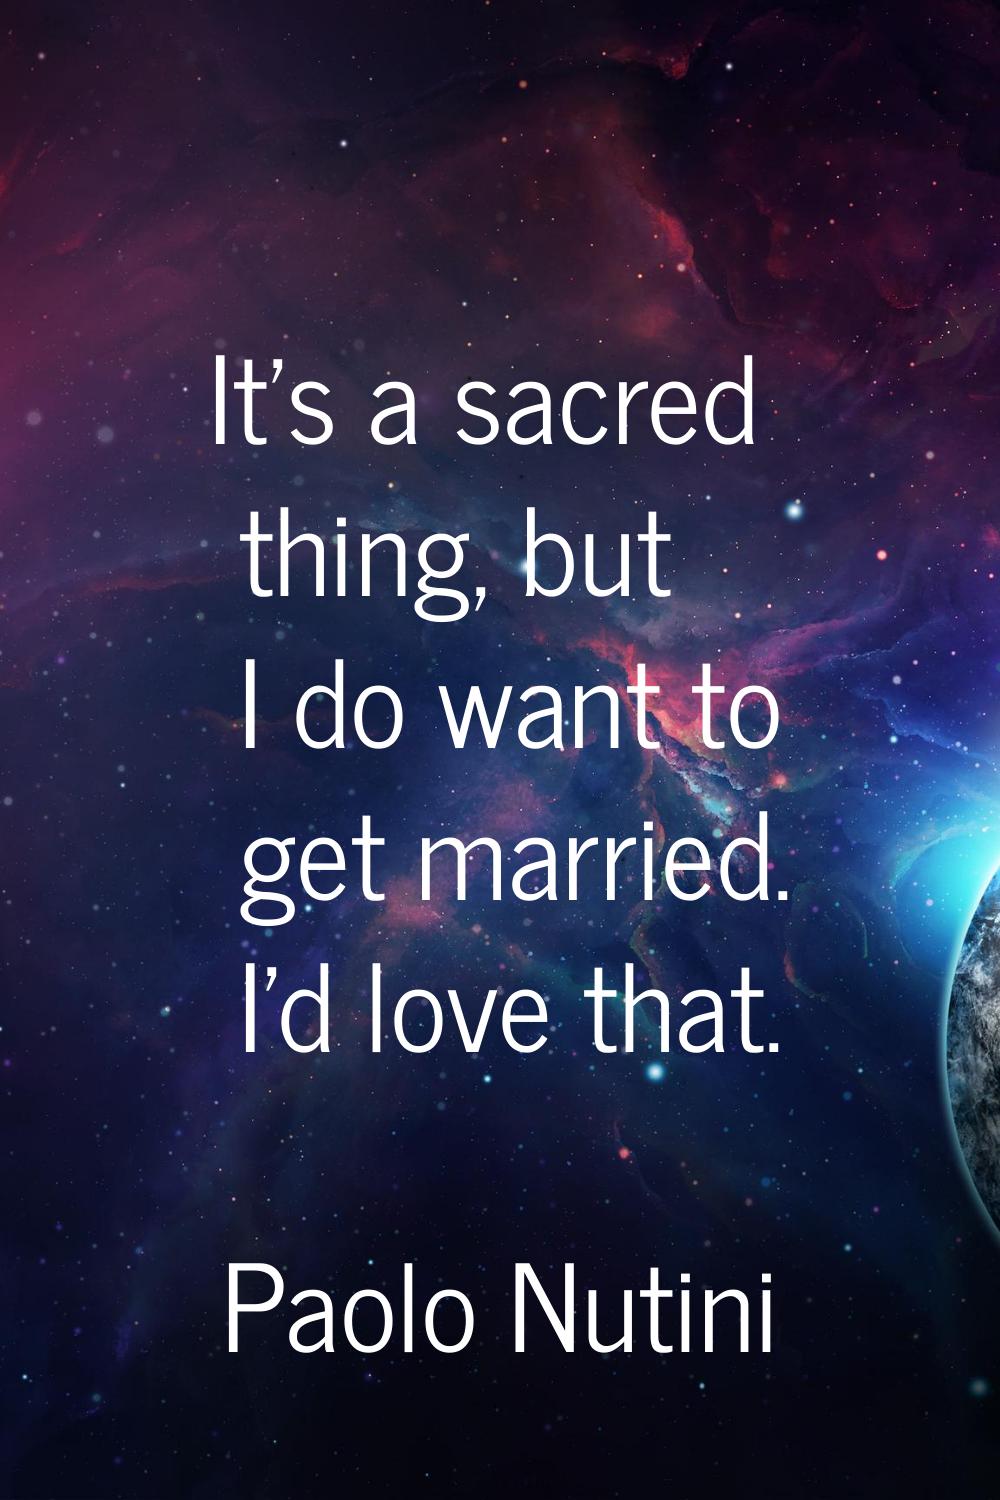 It's a sacred thing, but I do want to get married. I'd love that.